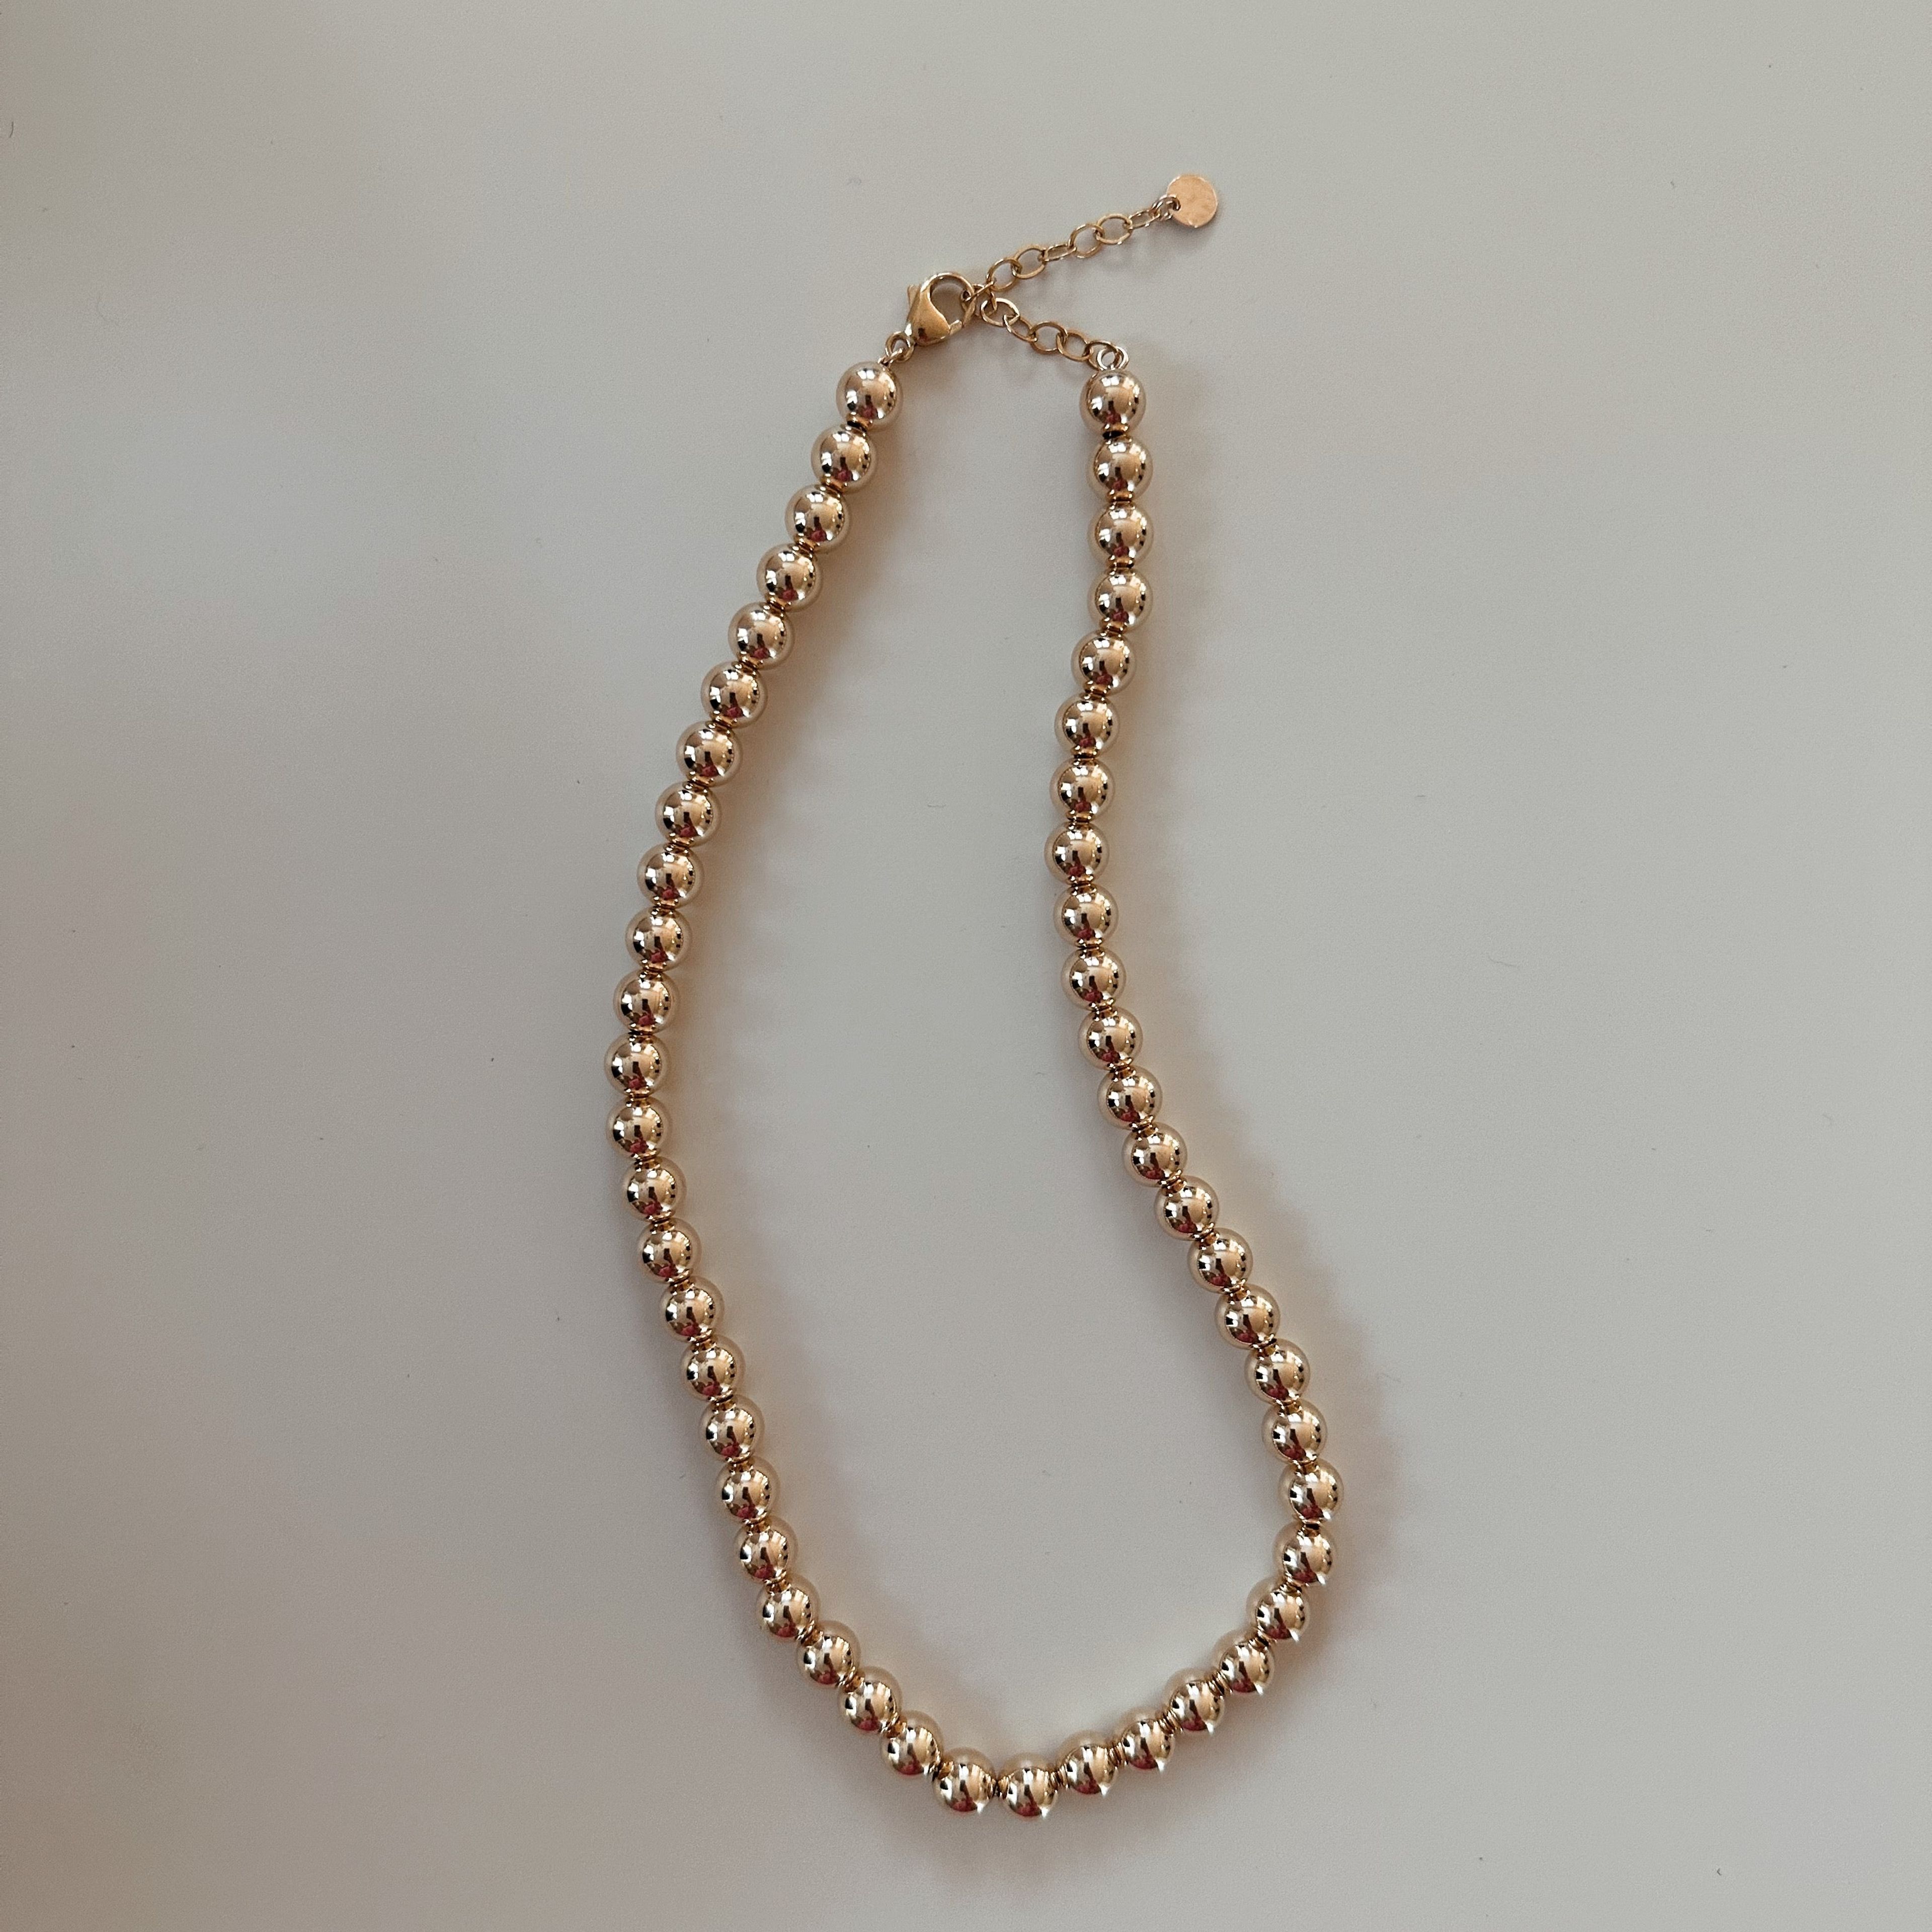 8mm Beaded Necklace - Gold